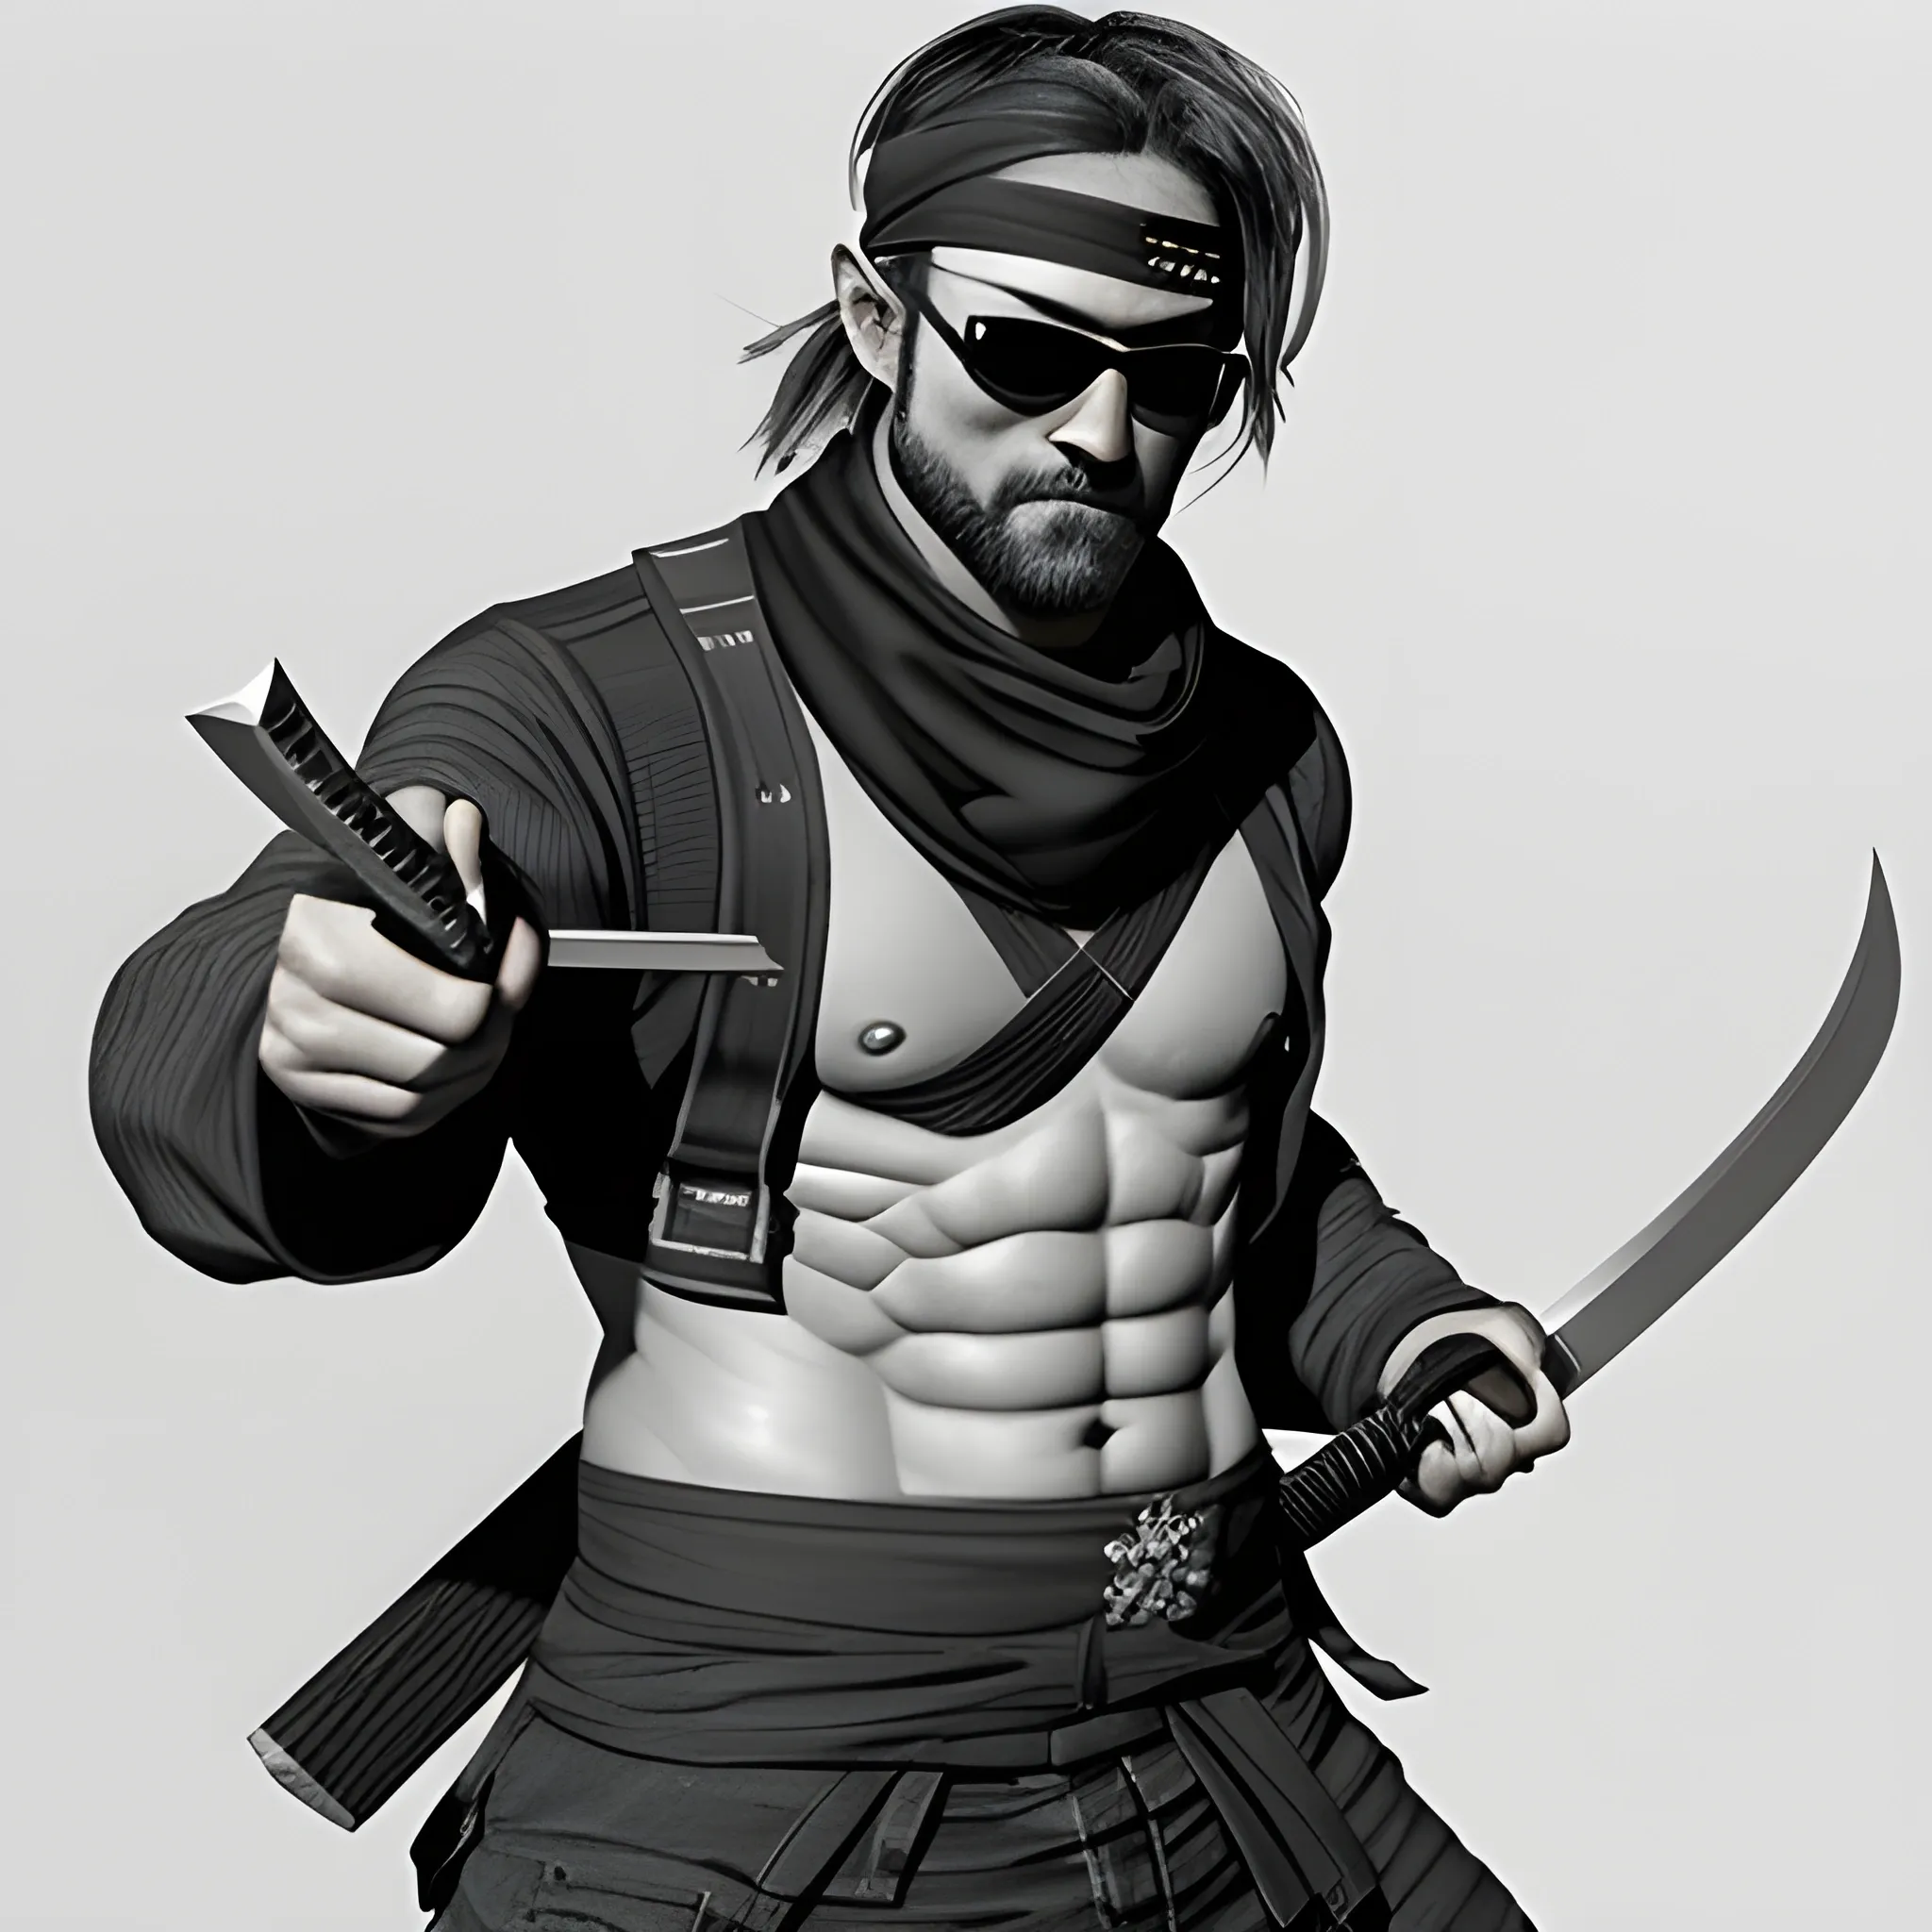 Madness Combat Sanford wielding a katana while showing his abs also wearing a sunglasses and a black bandana, Pencil Sketch, 3D